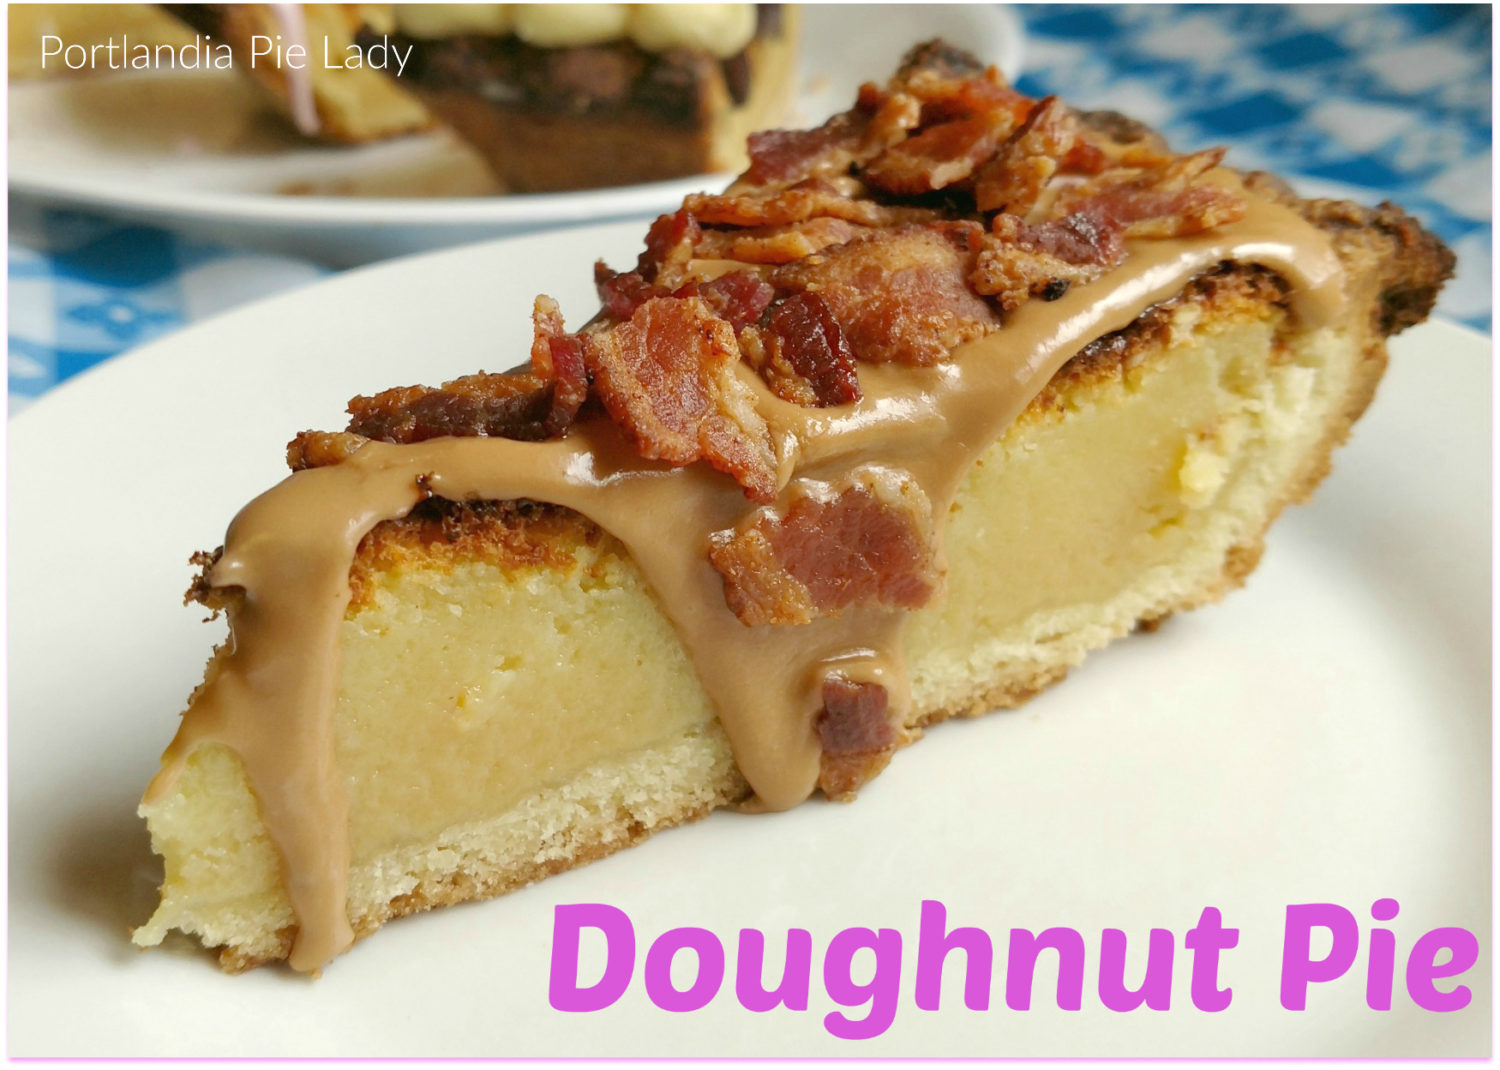 Doughnut Pie! Design your favorite doughnut flavor on each slice. The filling is tender, soft and vanilla fudgy in a flaky crust.